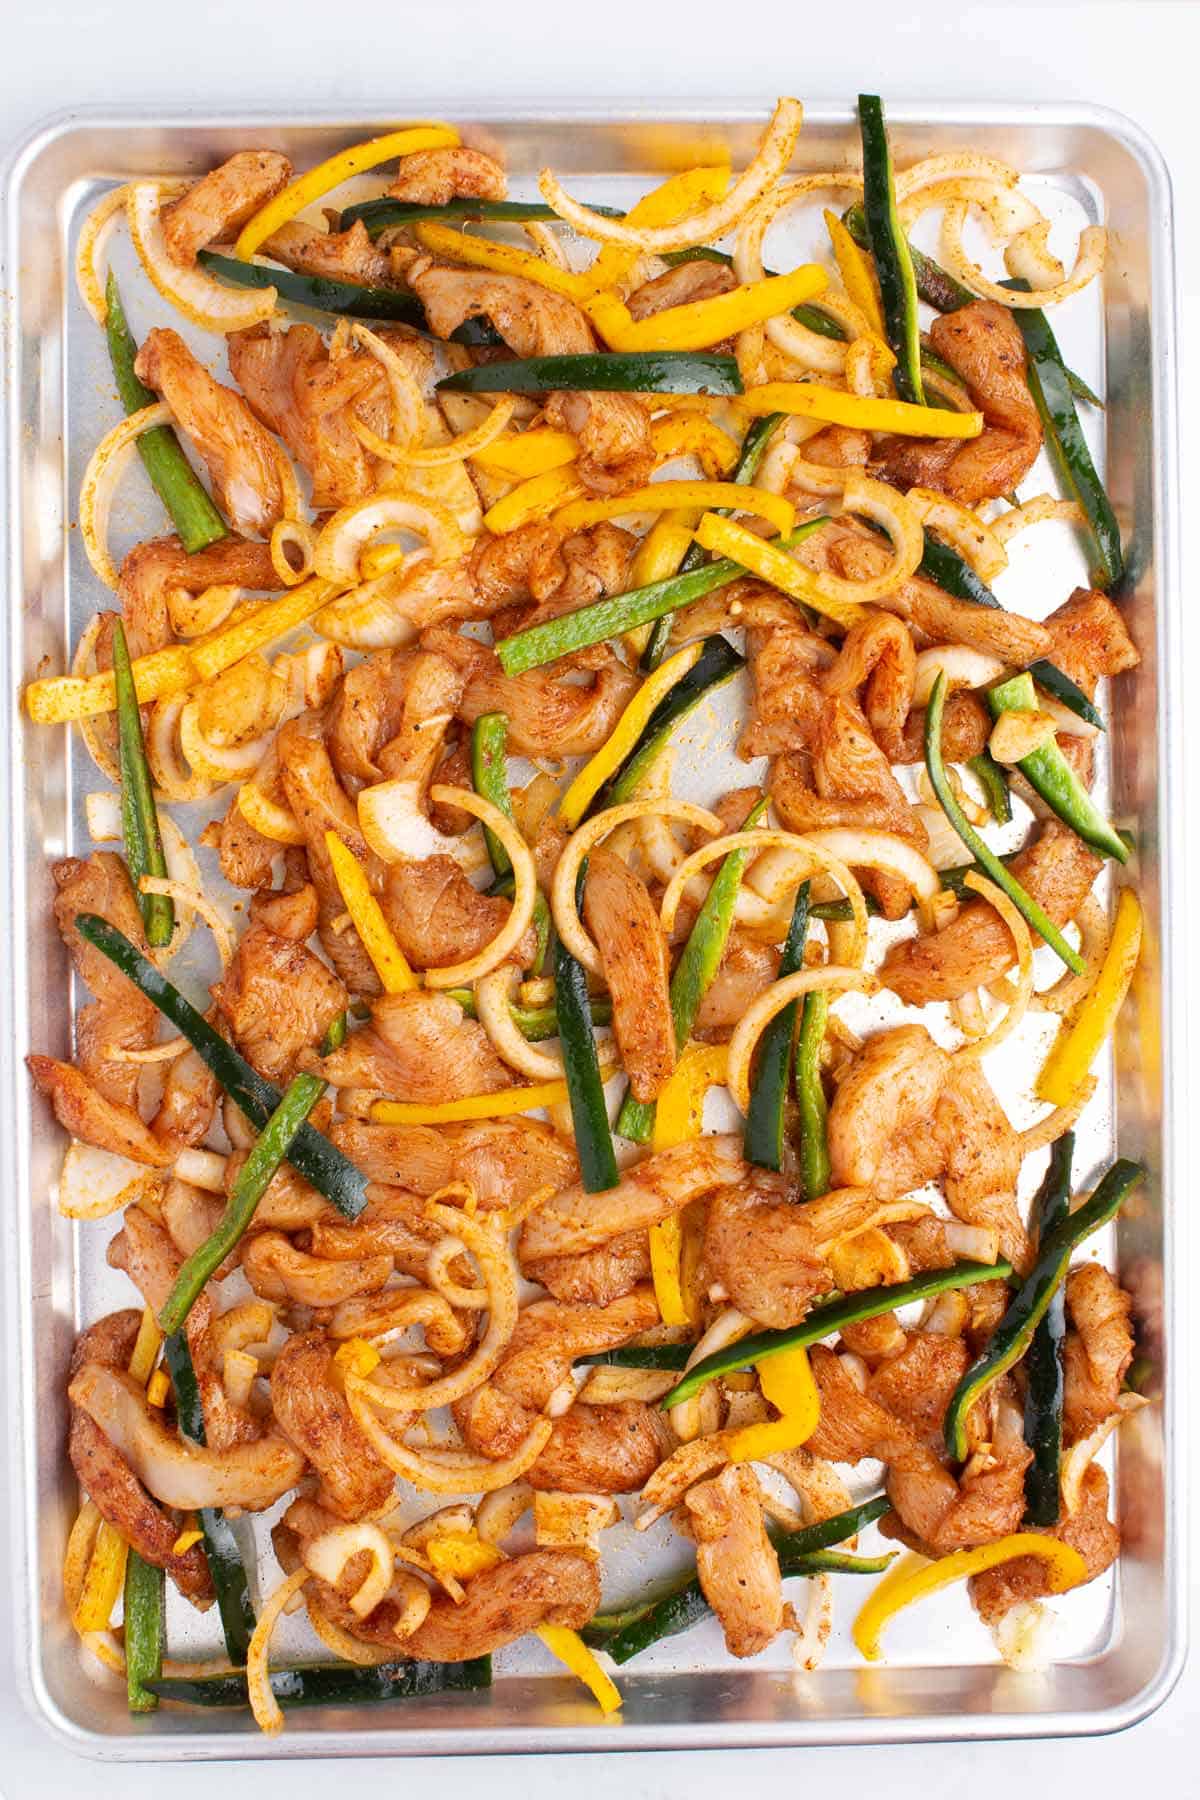 Raw sliced chicken, peppers, and onions tossed with seasonings on a large silver baking tray.